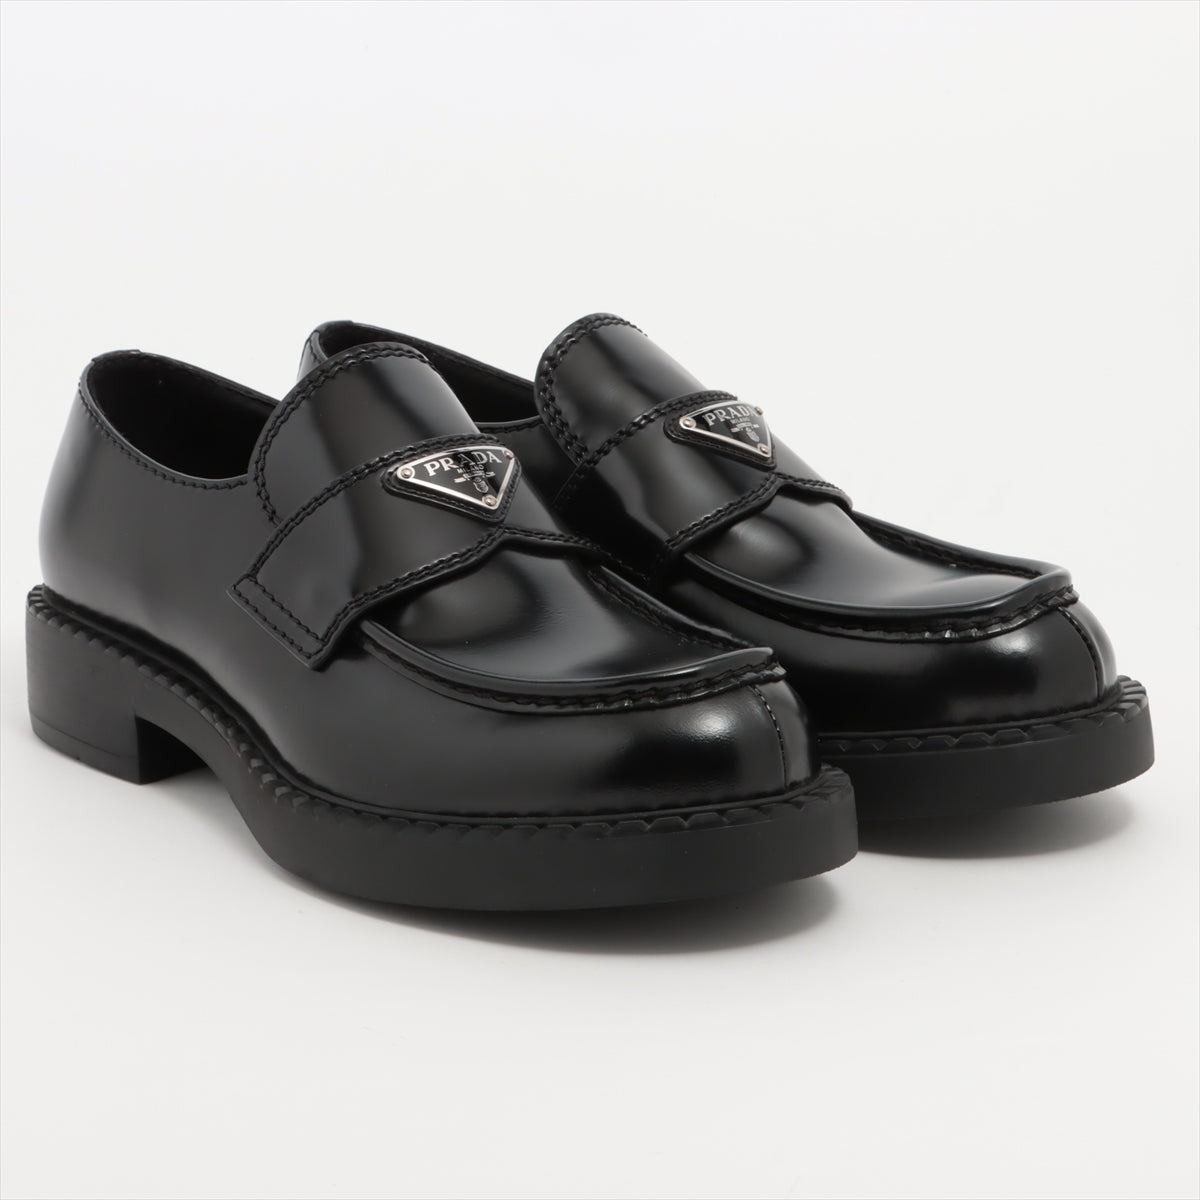 Prada Chocolate Leather Loafer 8 Men's Black 2DE127 Triangle logo box There is a bag